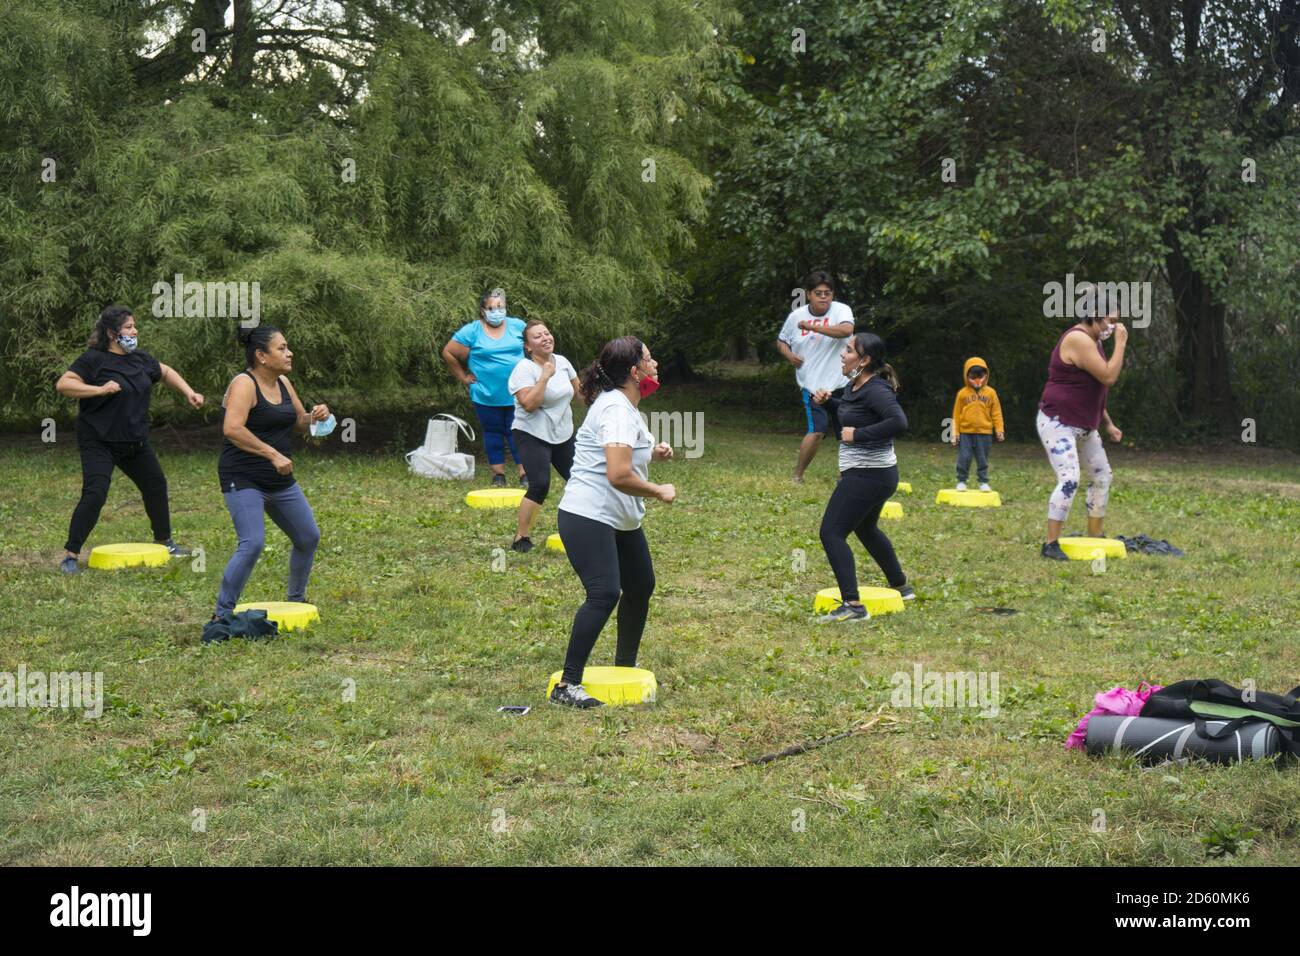 Exercise group of Hispanic women during the Covid-19 pandemic in Prospect Park, Brooklyn, New York. Stock Photo